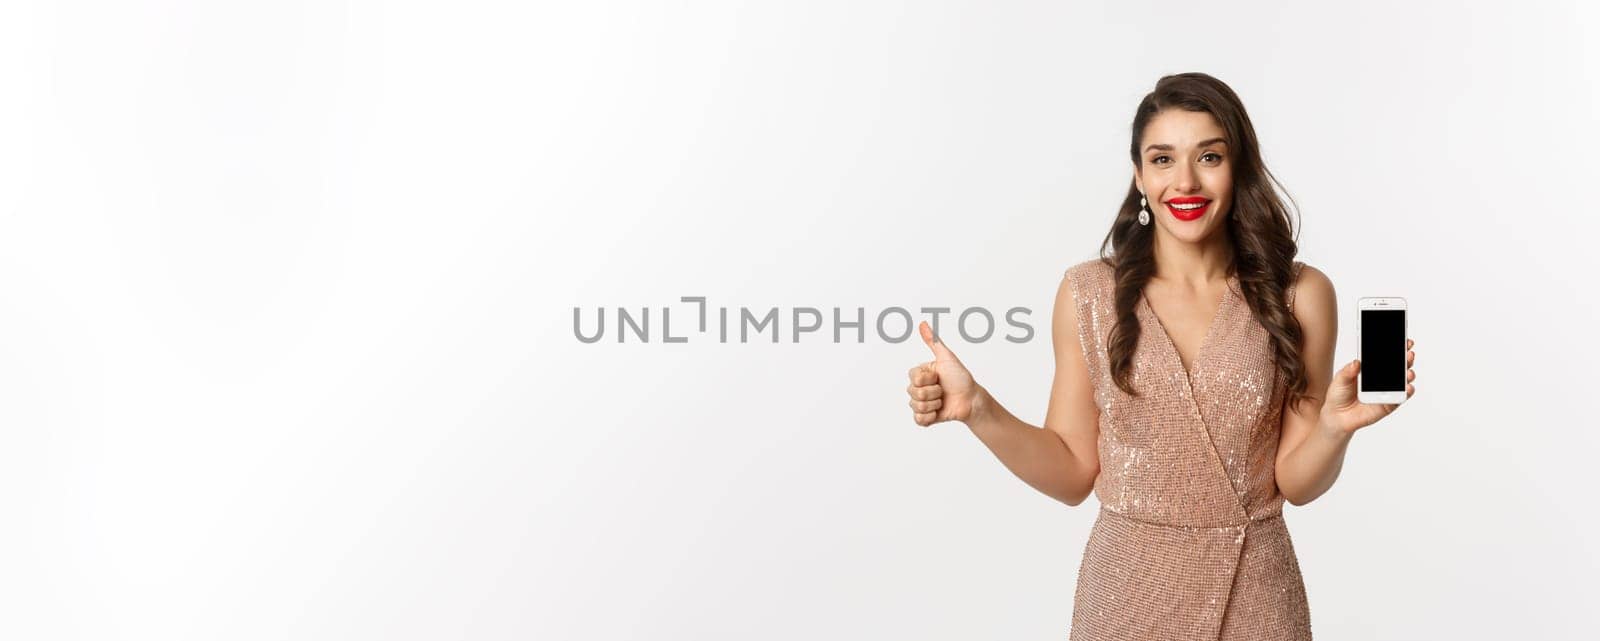 Online shopping. Beautiful young woman in party dress and makeup, showing thumbs up and mobile screen, praising good app, white background.